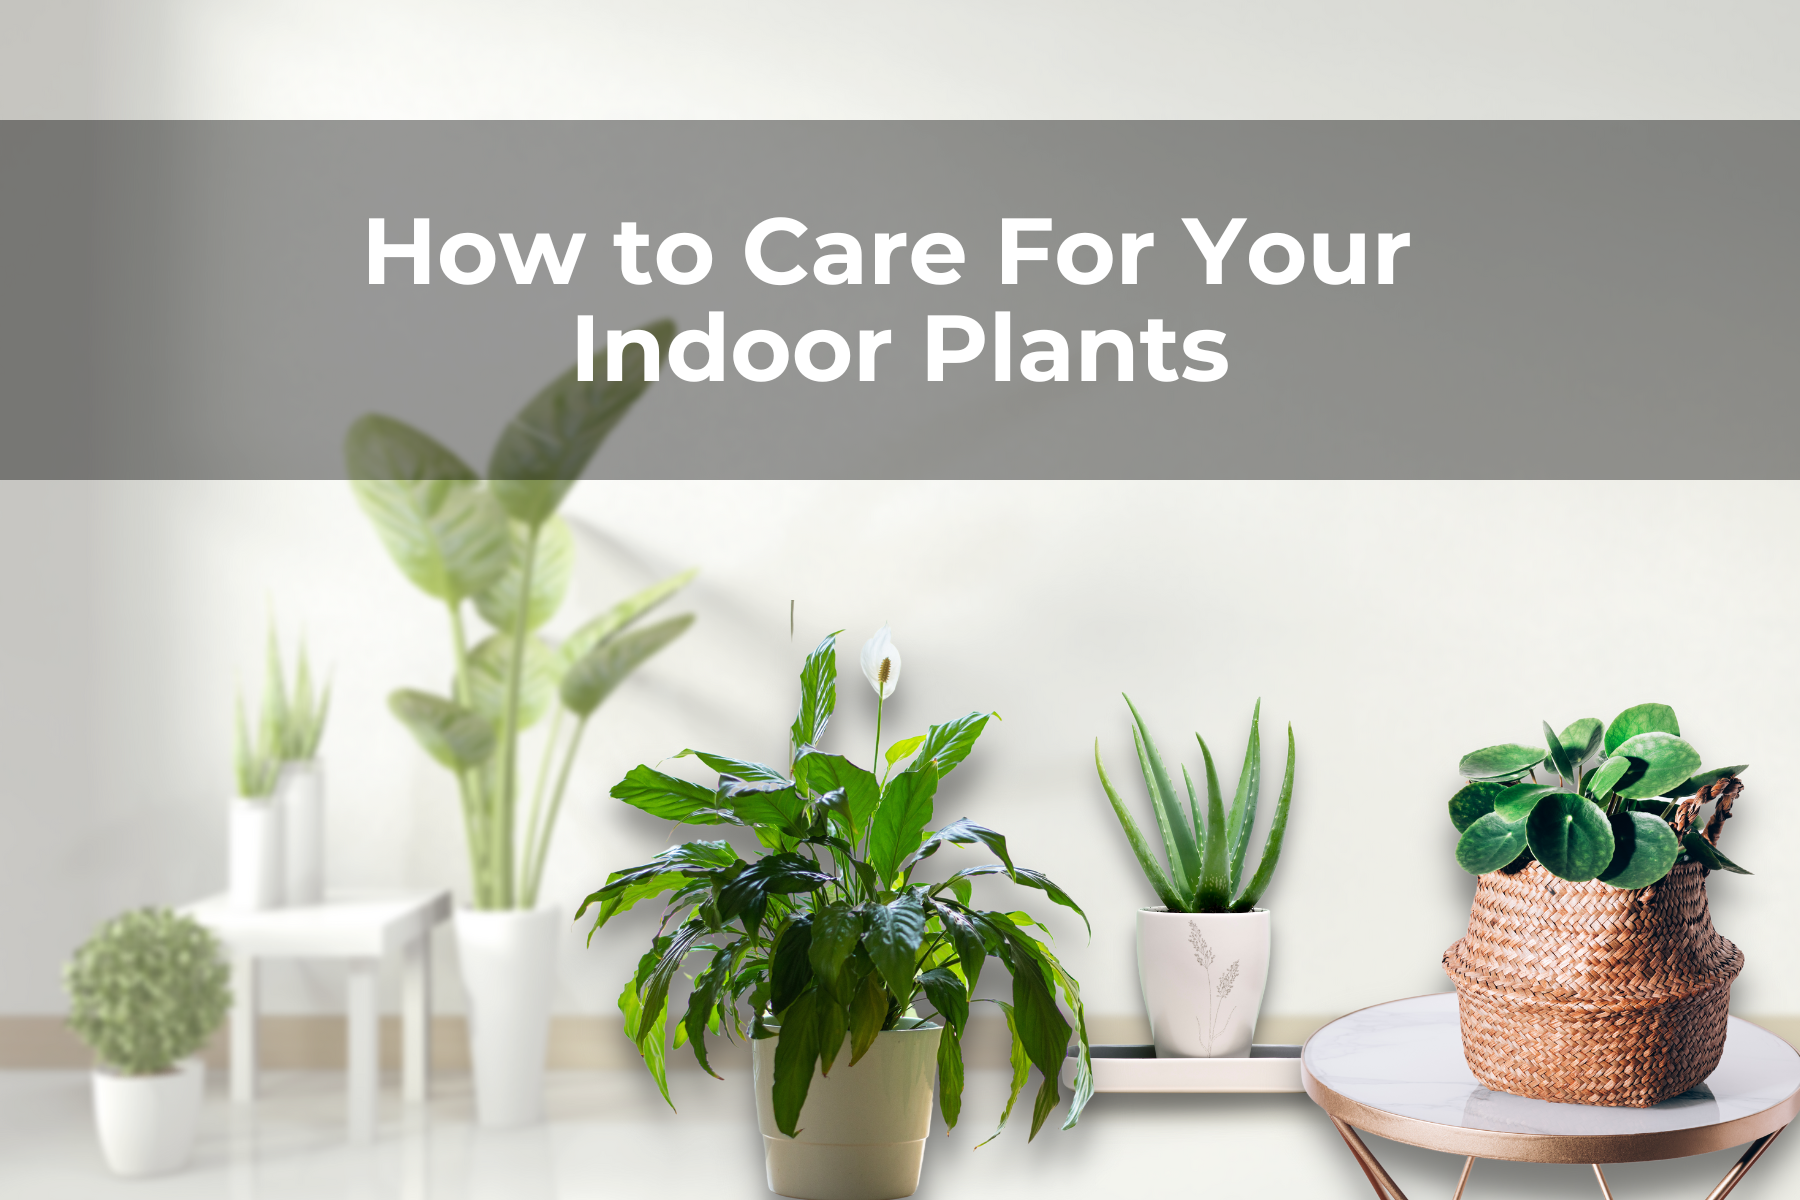 How to Care For Your Indoor Plants